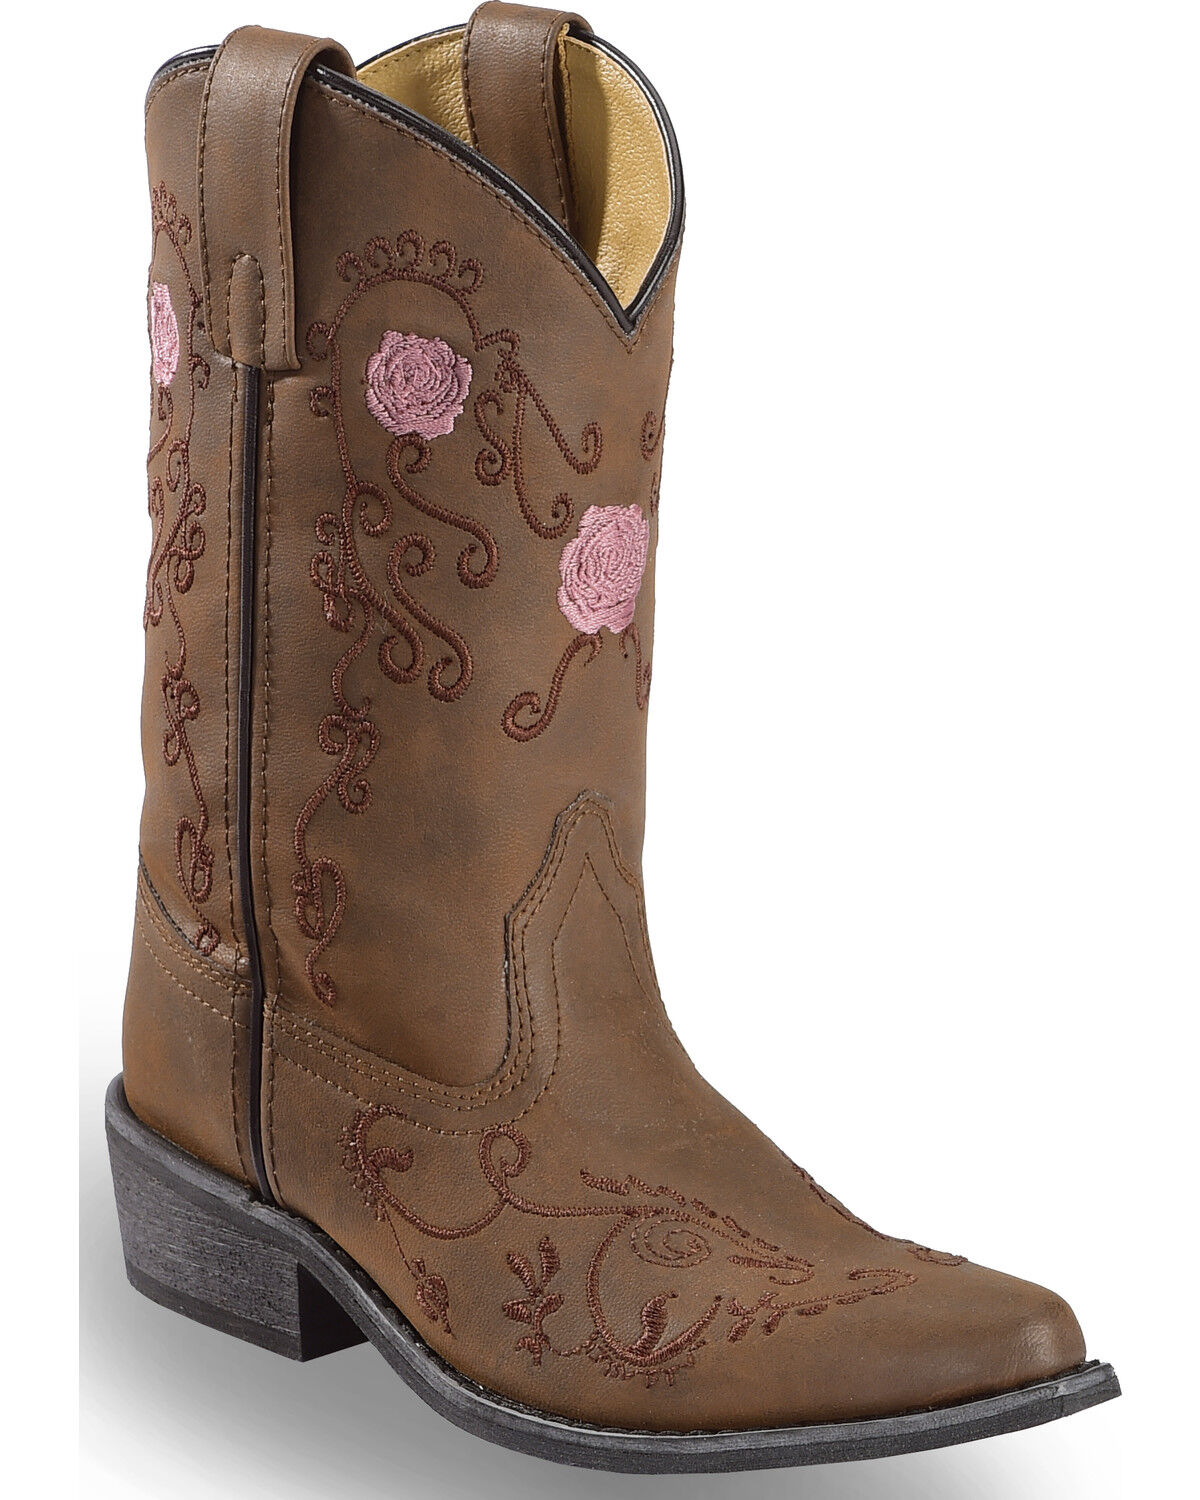 Girls' Boots Sizes 8.5-3 - Sheplers